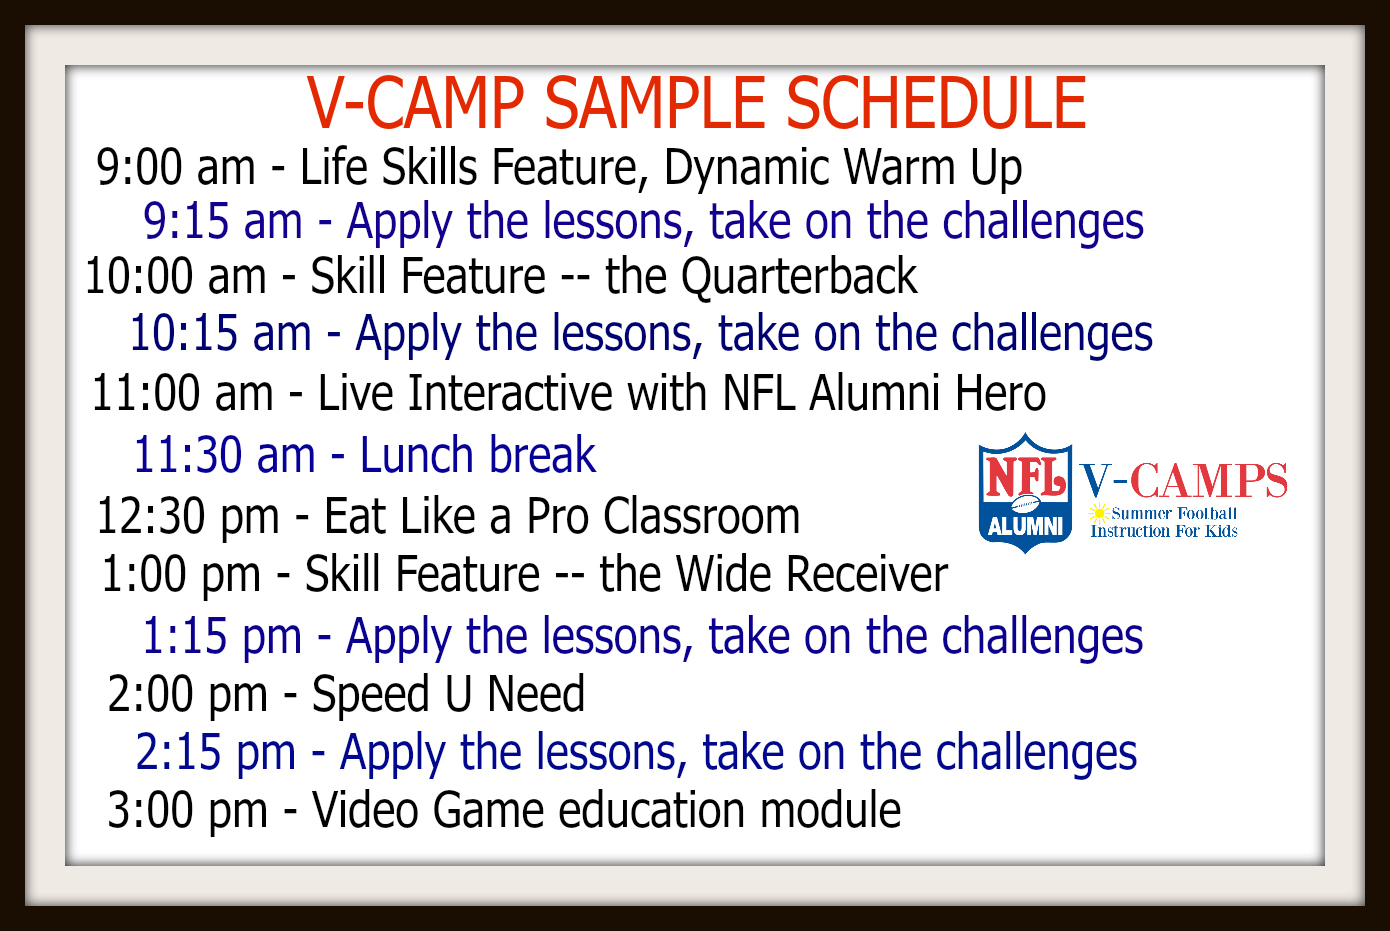 Schedule, VCamp Pro Sports Experience